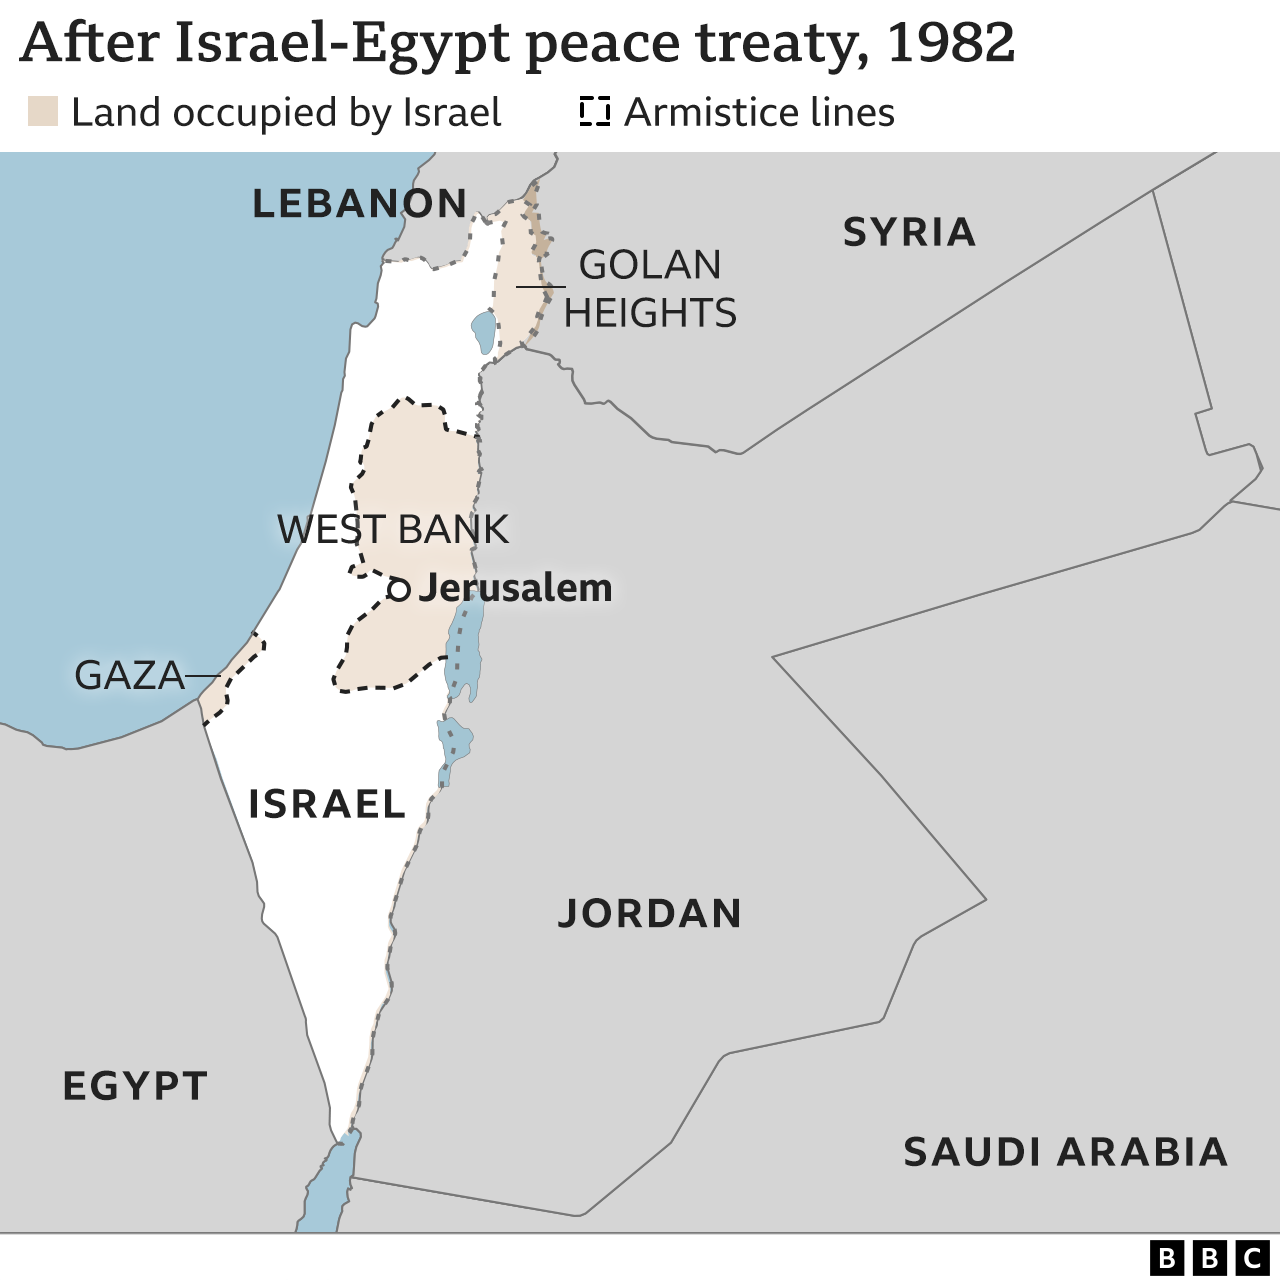 Map showing Israel and region in 1982 after Israel-Egypt peace treaty